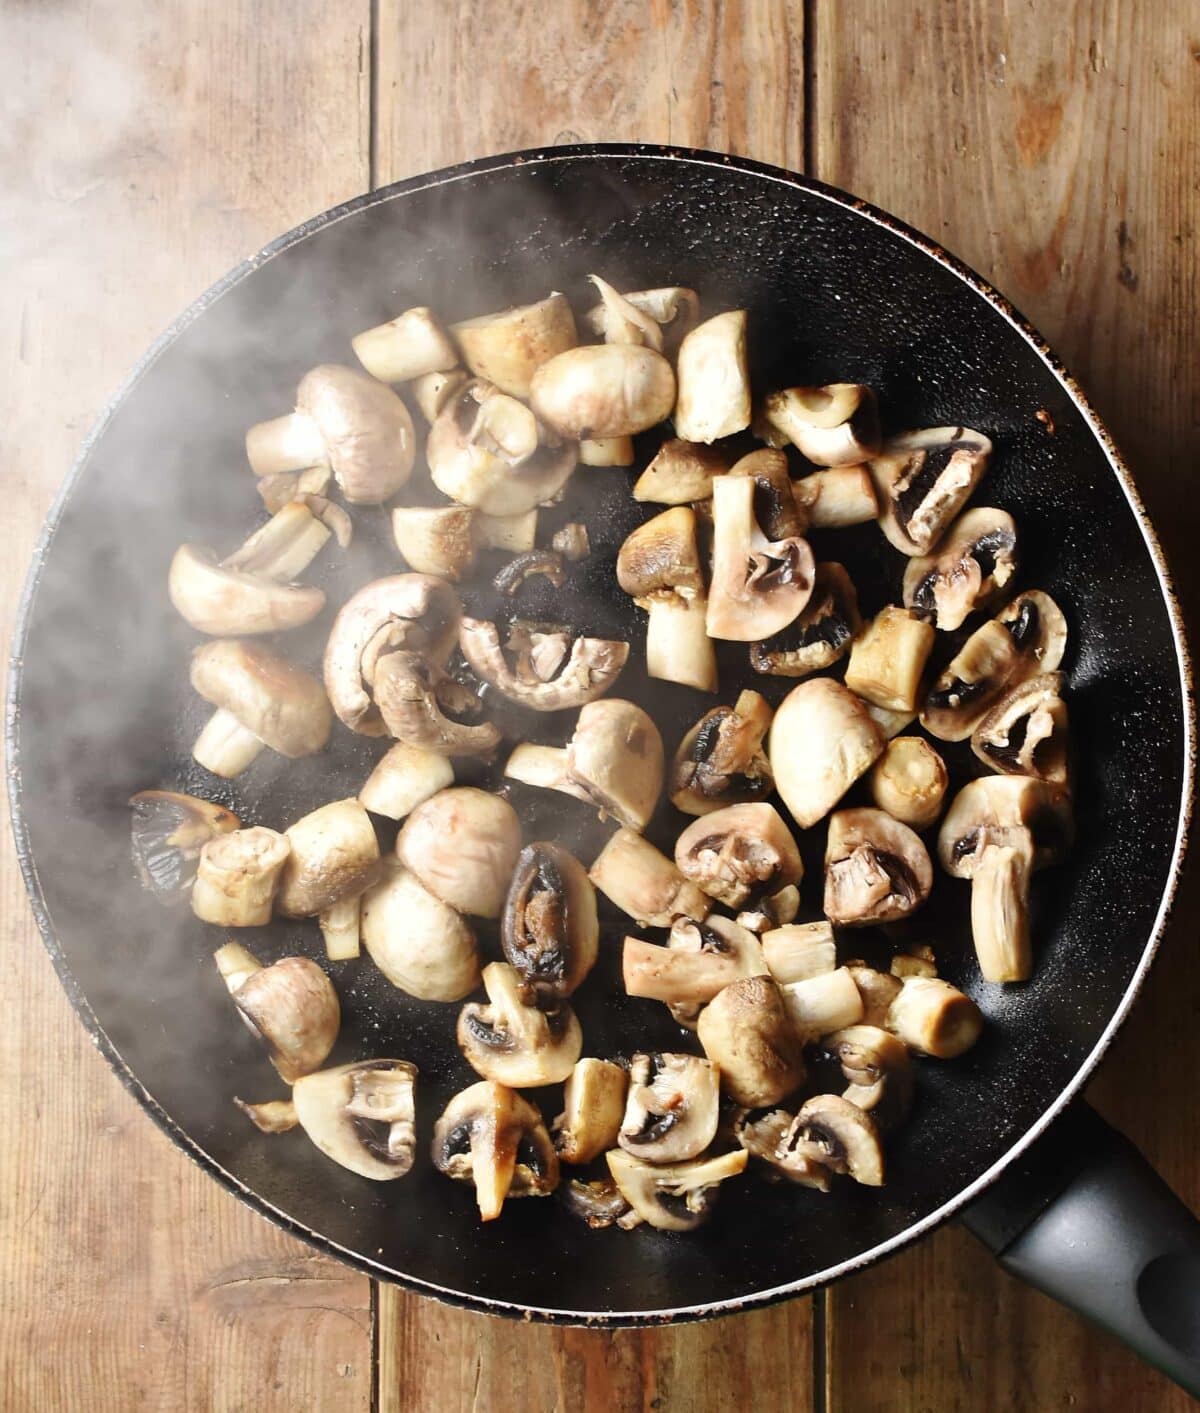 Chopped mushrooms in large pan with steam visible.